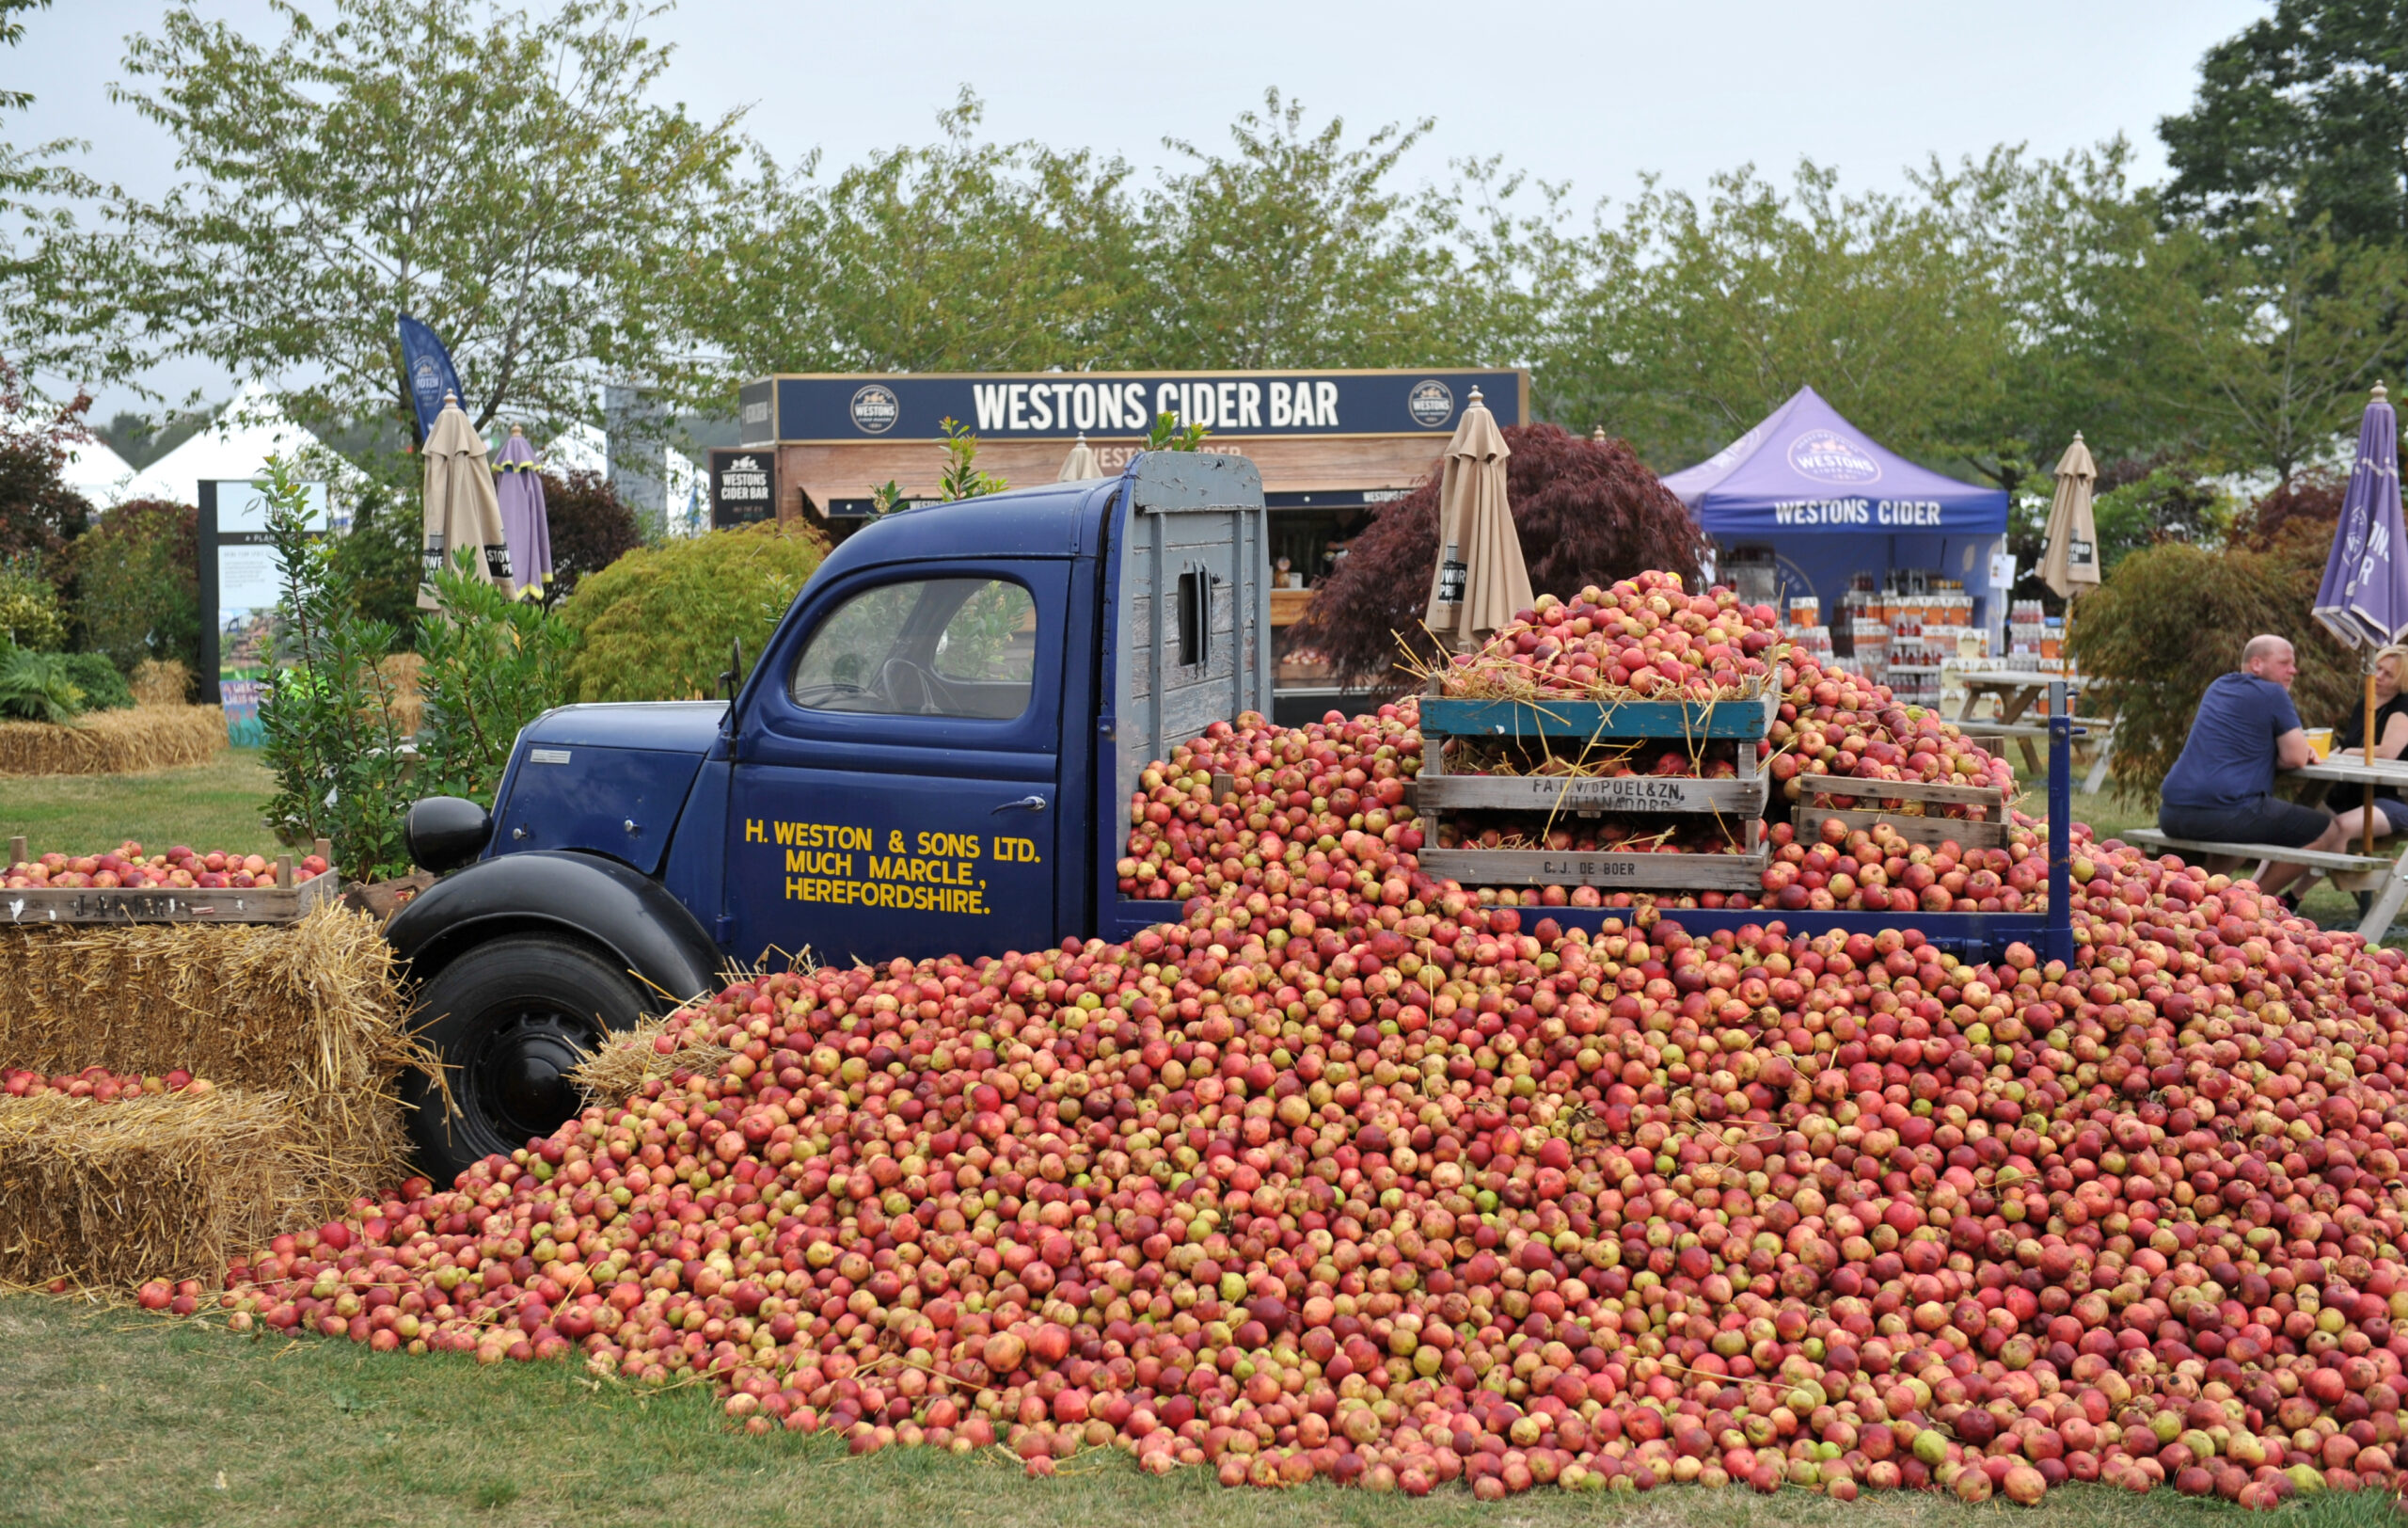 Malvern Autumn Show is all set to be the UK’s biggest Harvest Festival